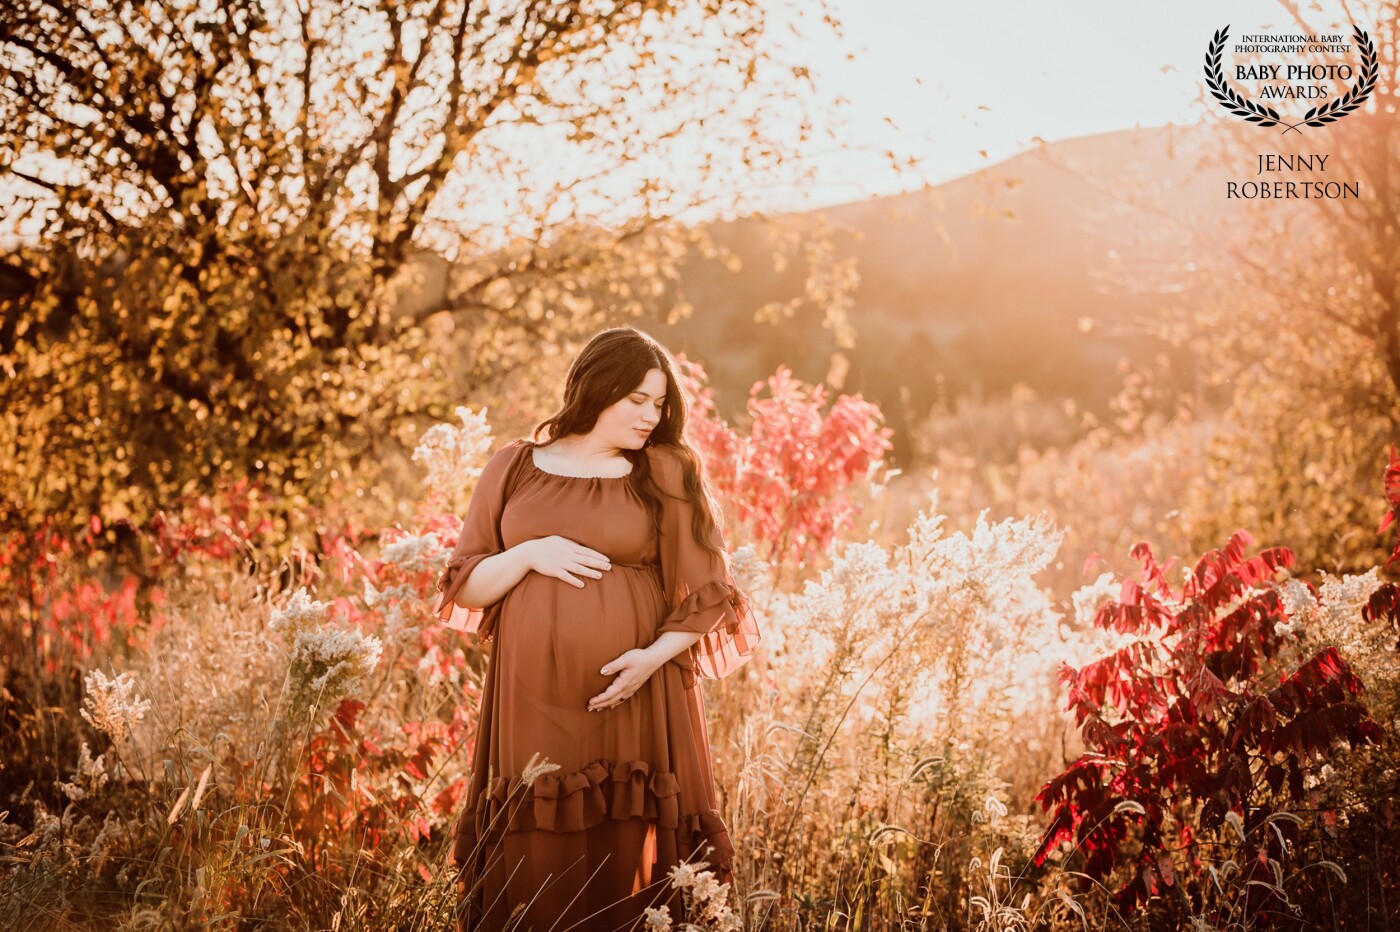 A gorgeous Fall maternity session with beautiful light and colors. This was taken on the edge of a parking lot but I knew it was the perfect location when I saw it.